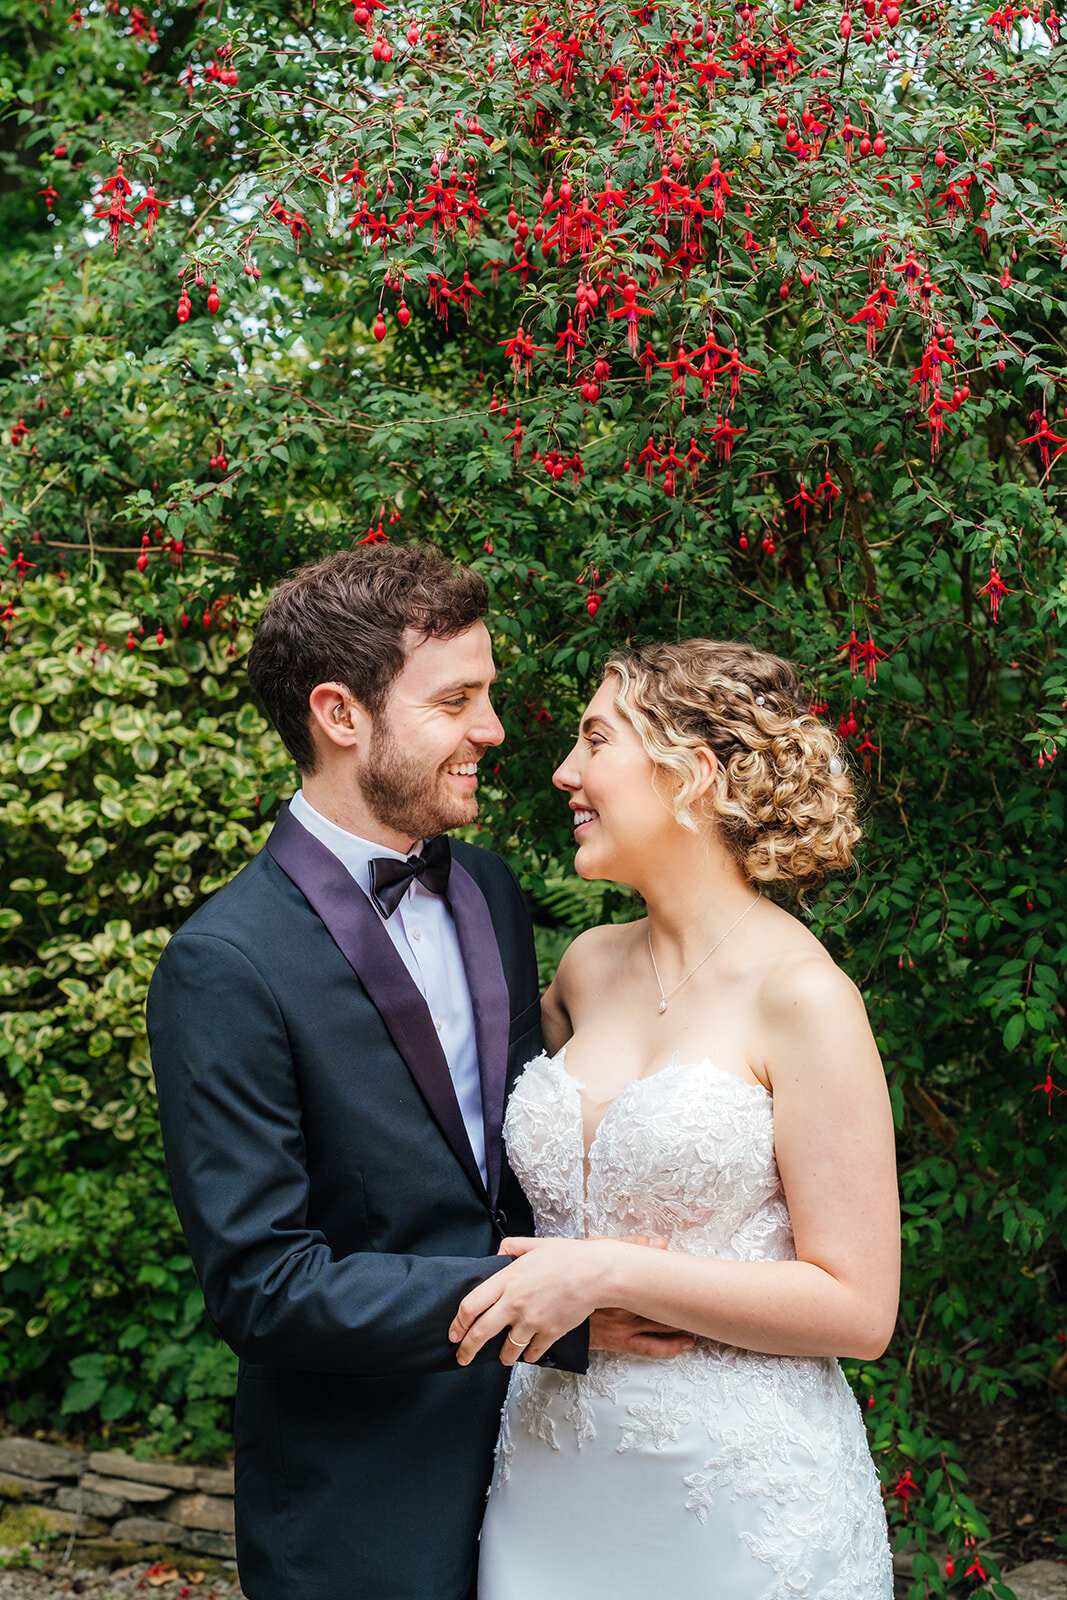 Kilminorth Cottages styled wedding shoot - Charlie Flounders Photography -0345